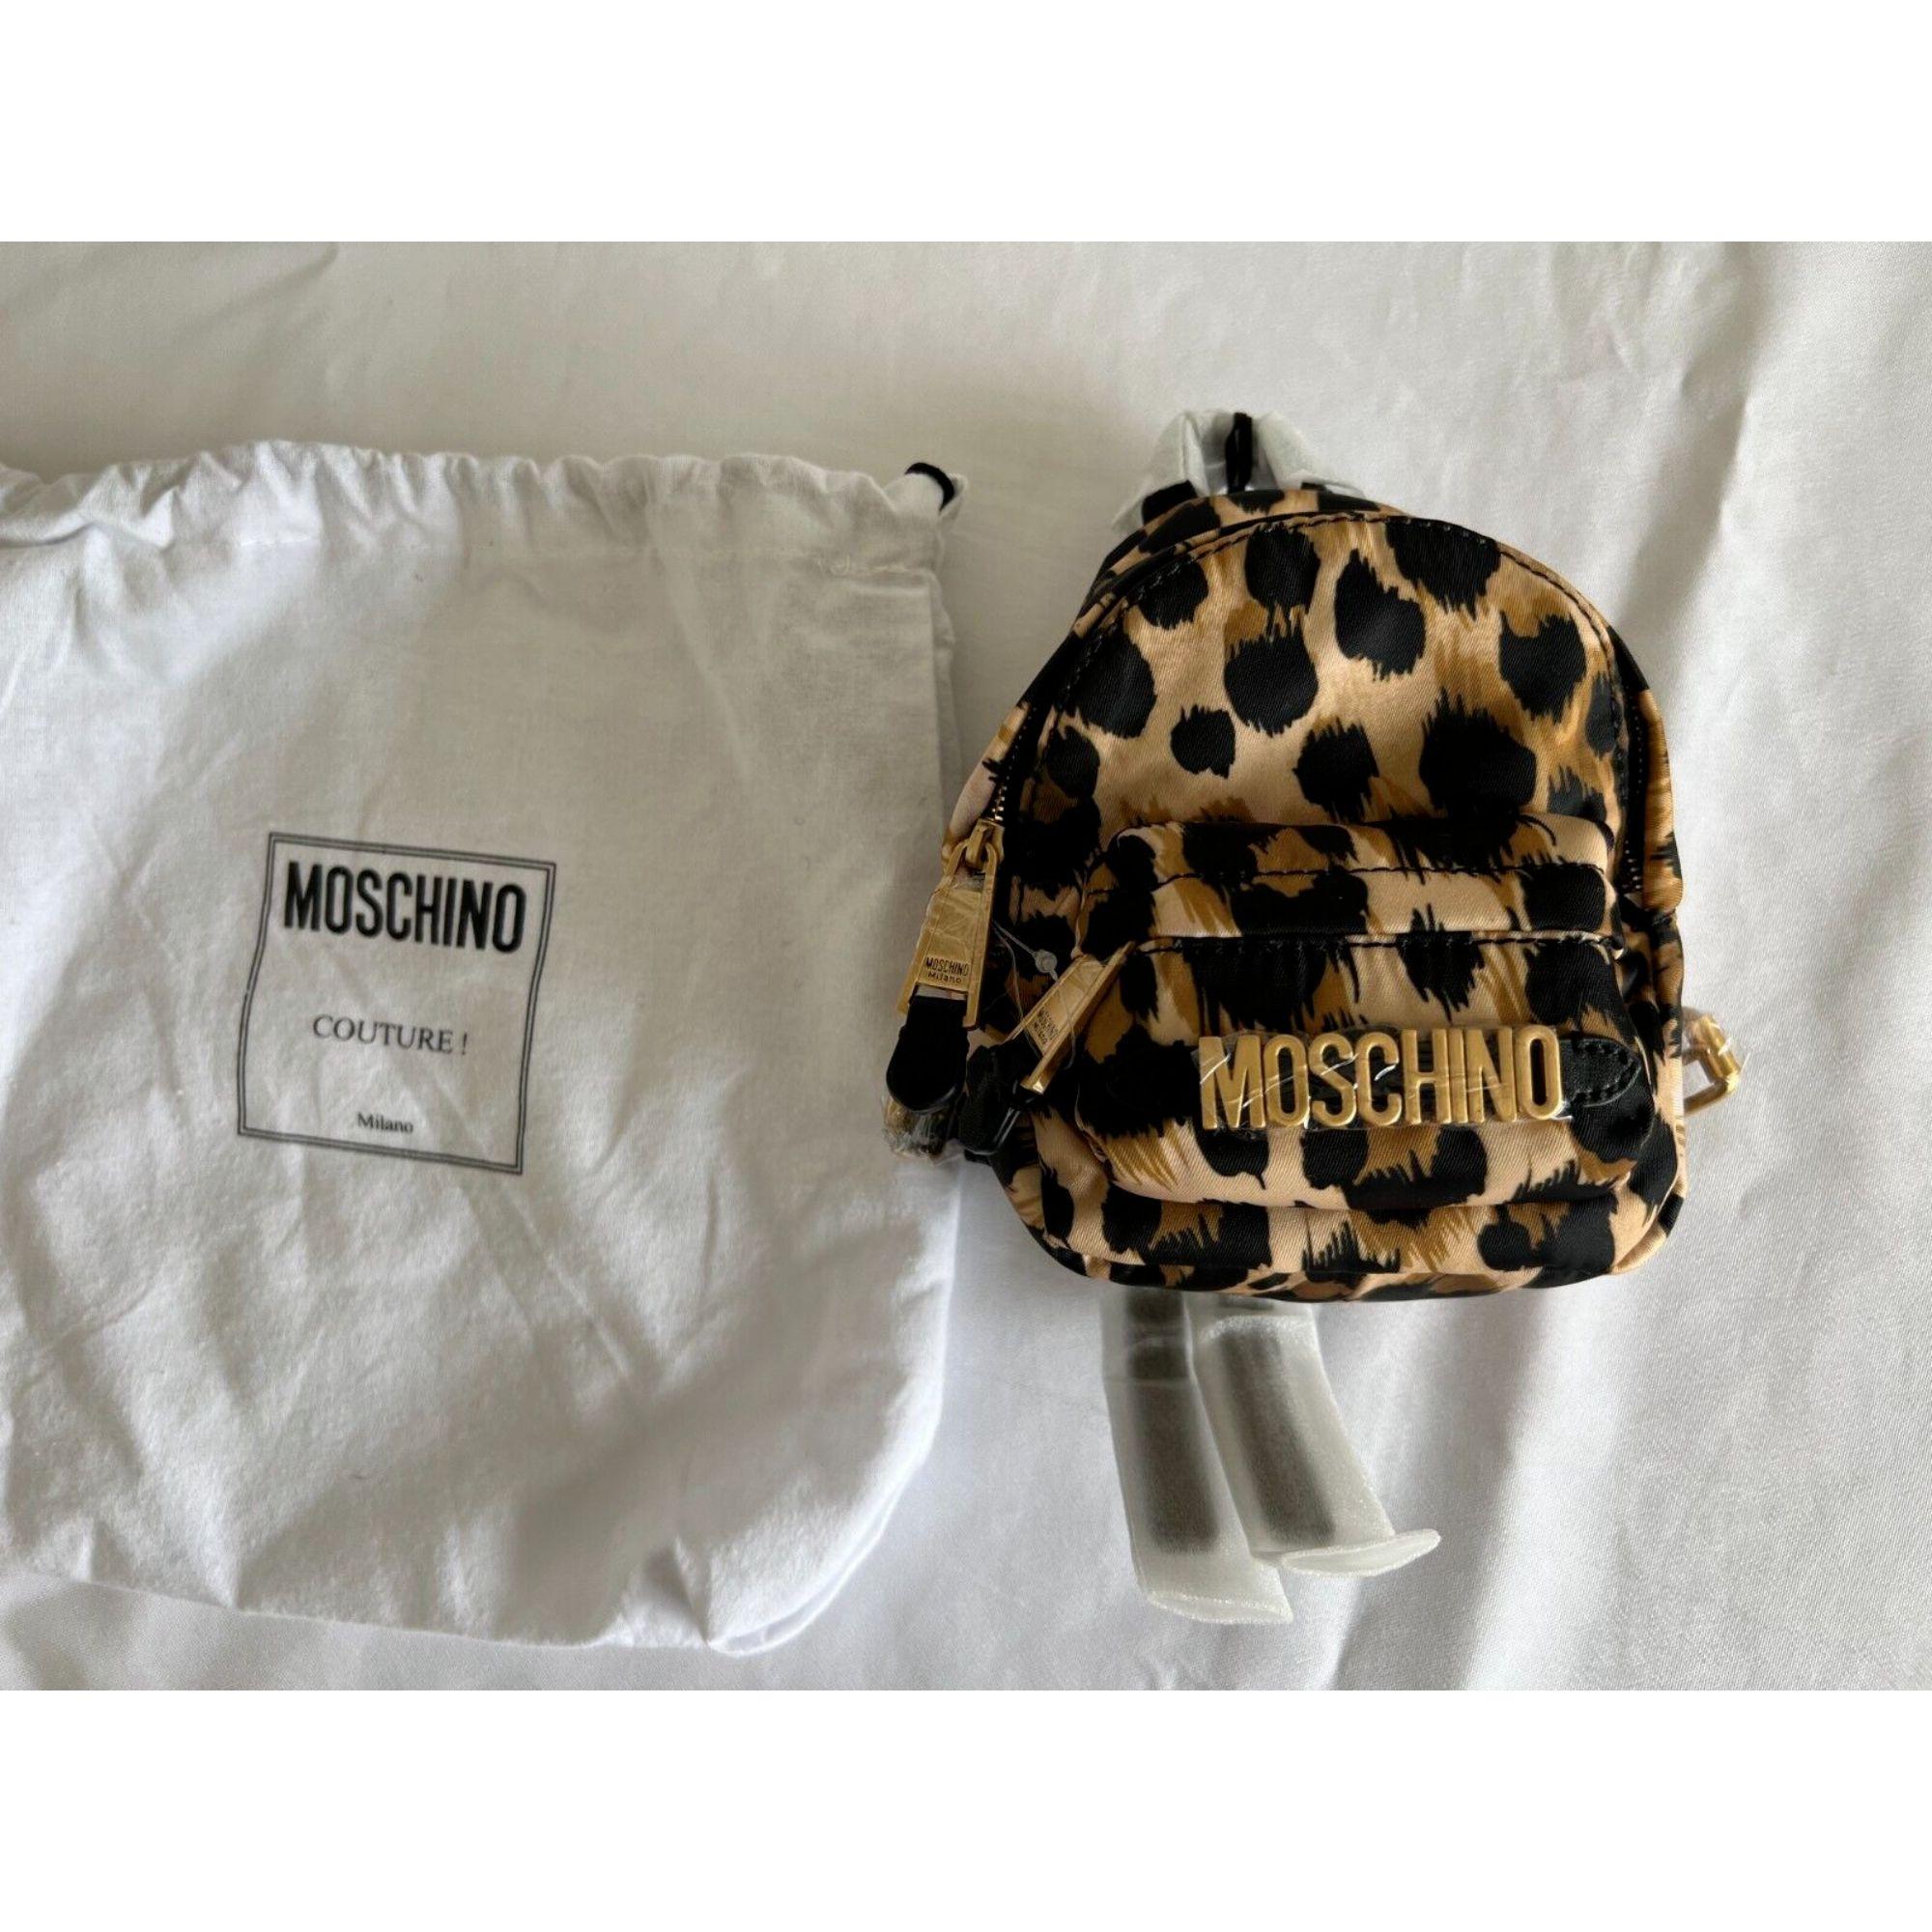 AW21 Moschino Couture Leopard Print Shoulder Bag Mini Backpack by Jeremy Scott For Sale 3